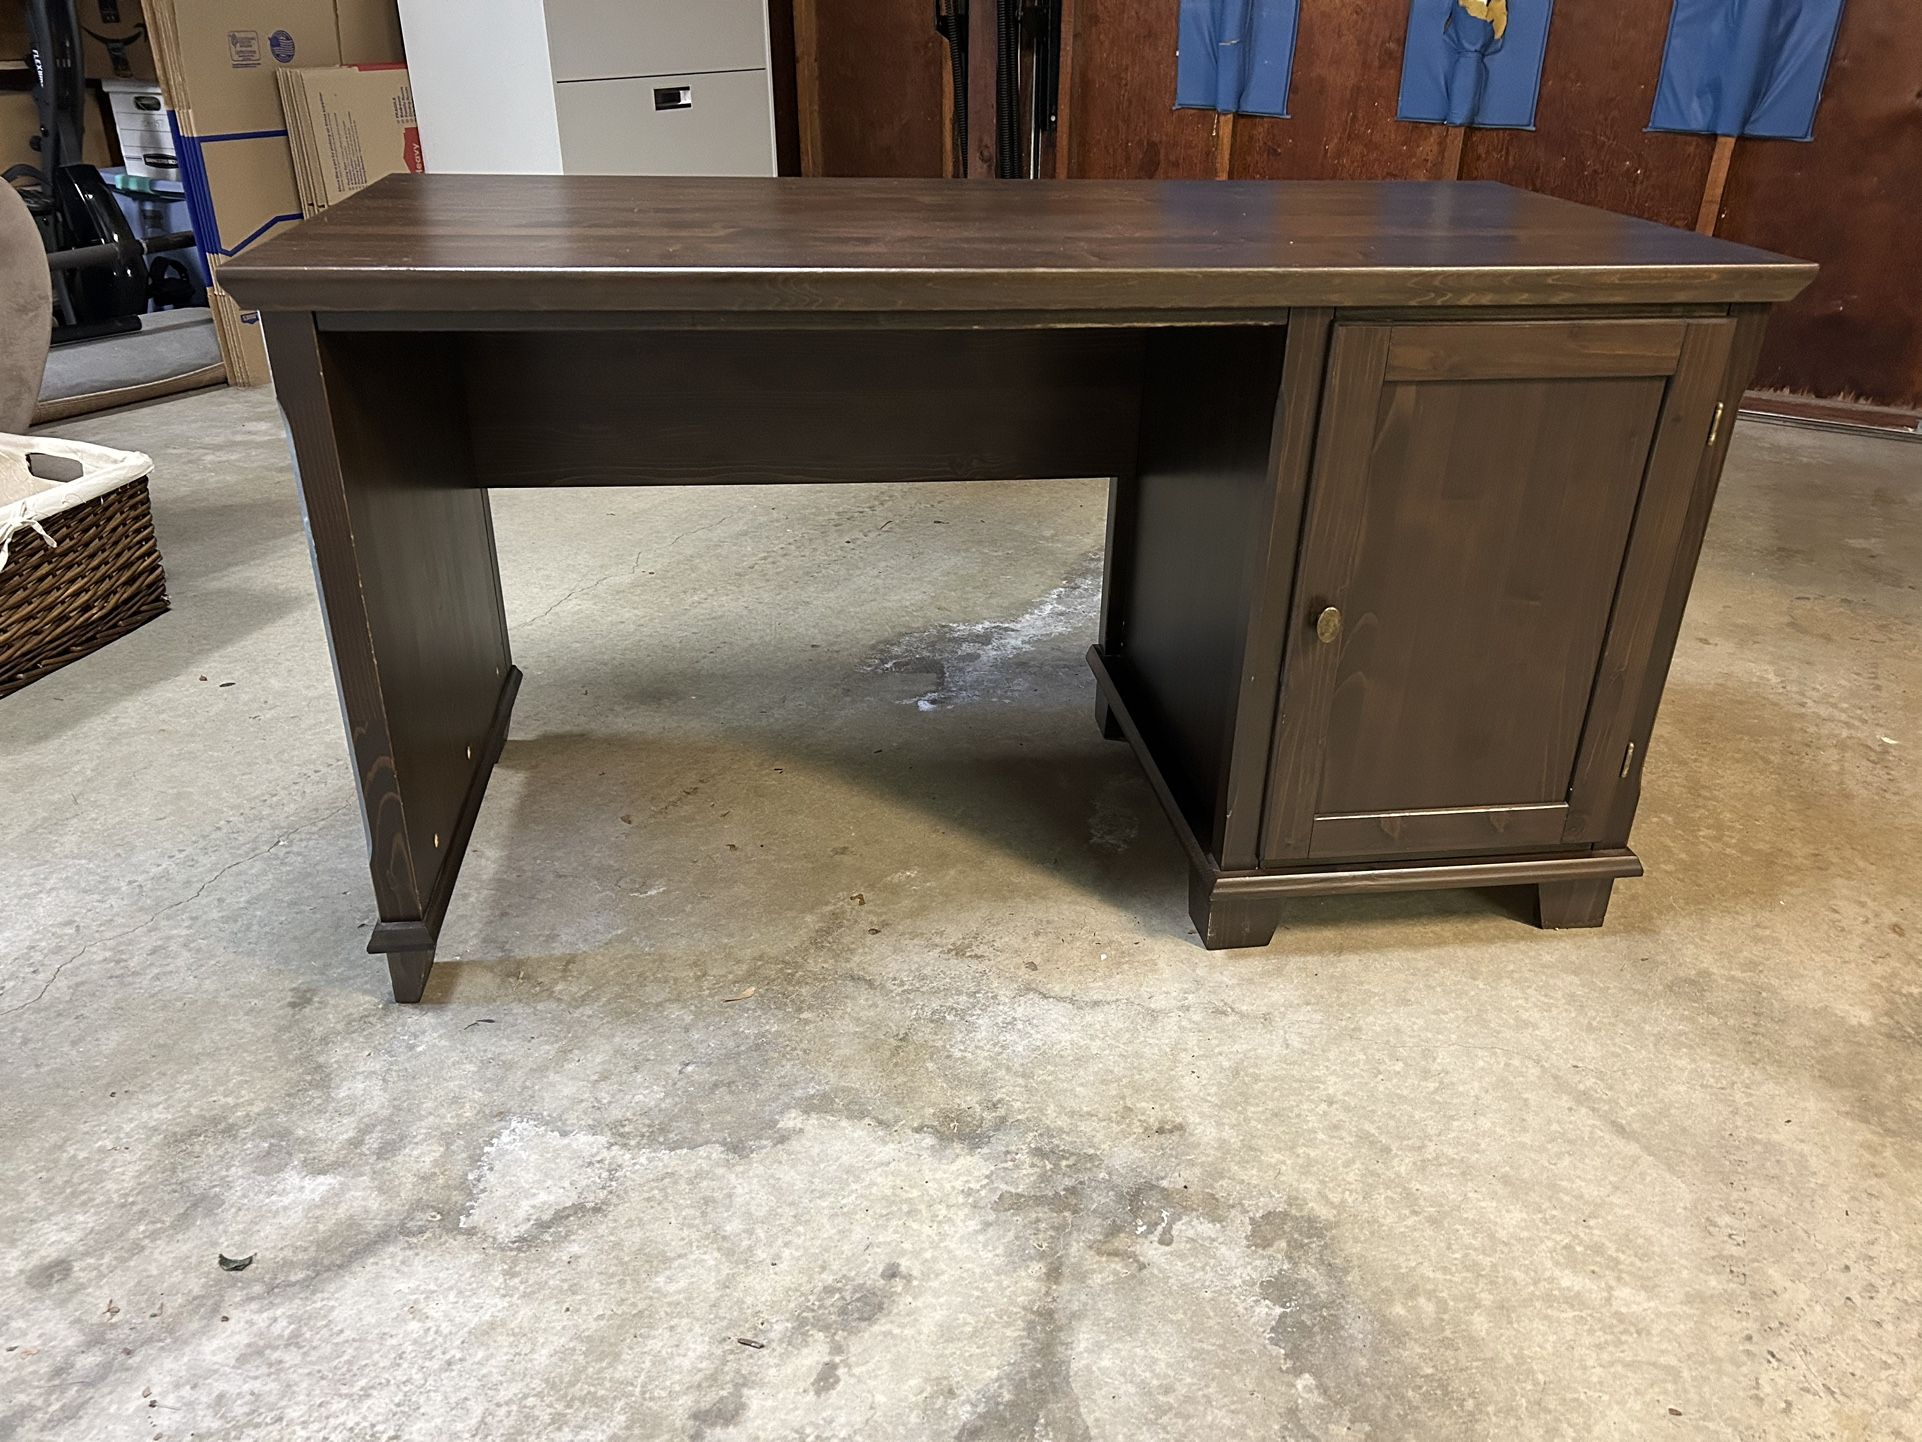 Solid Wood Desk With Cupboard/Slide-out Trays, Stylish/Cute!